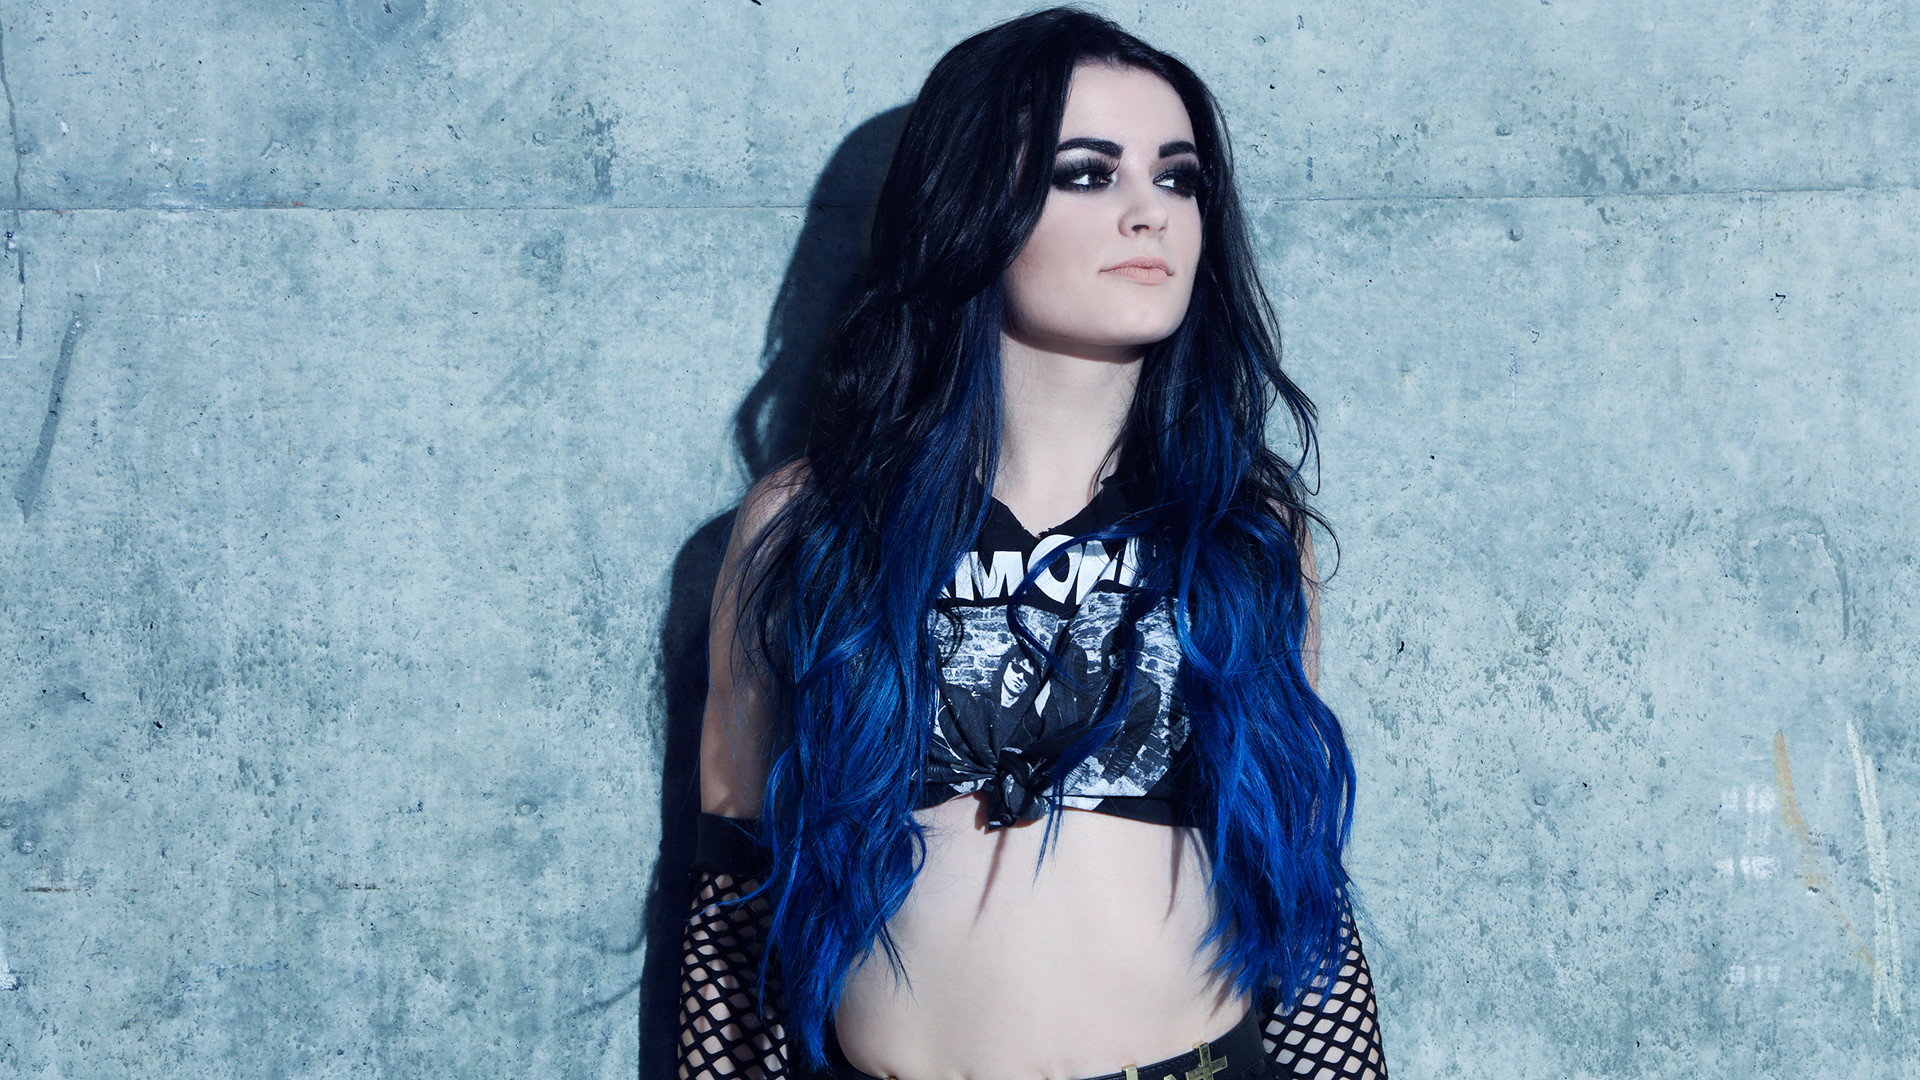 Paige Wwe Wallpapers